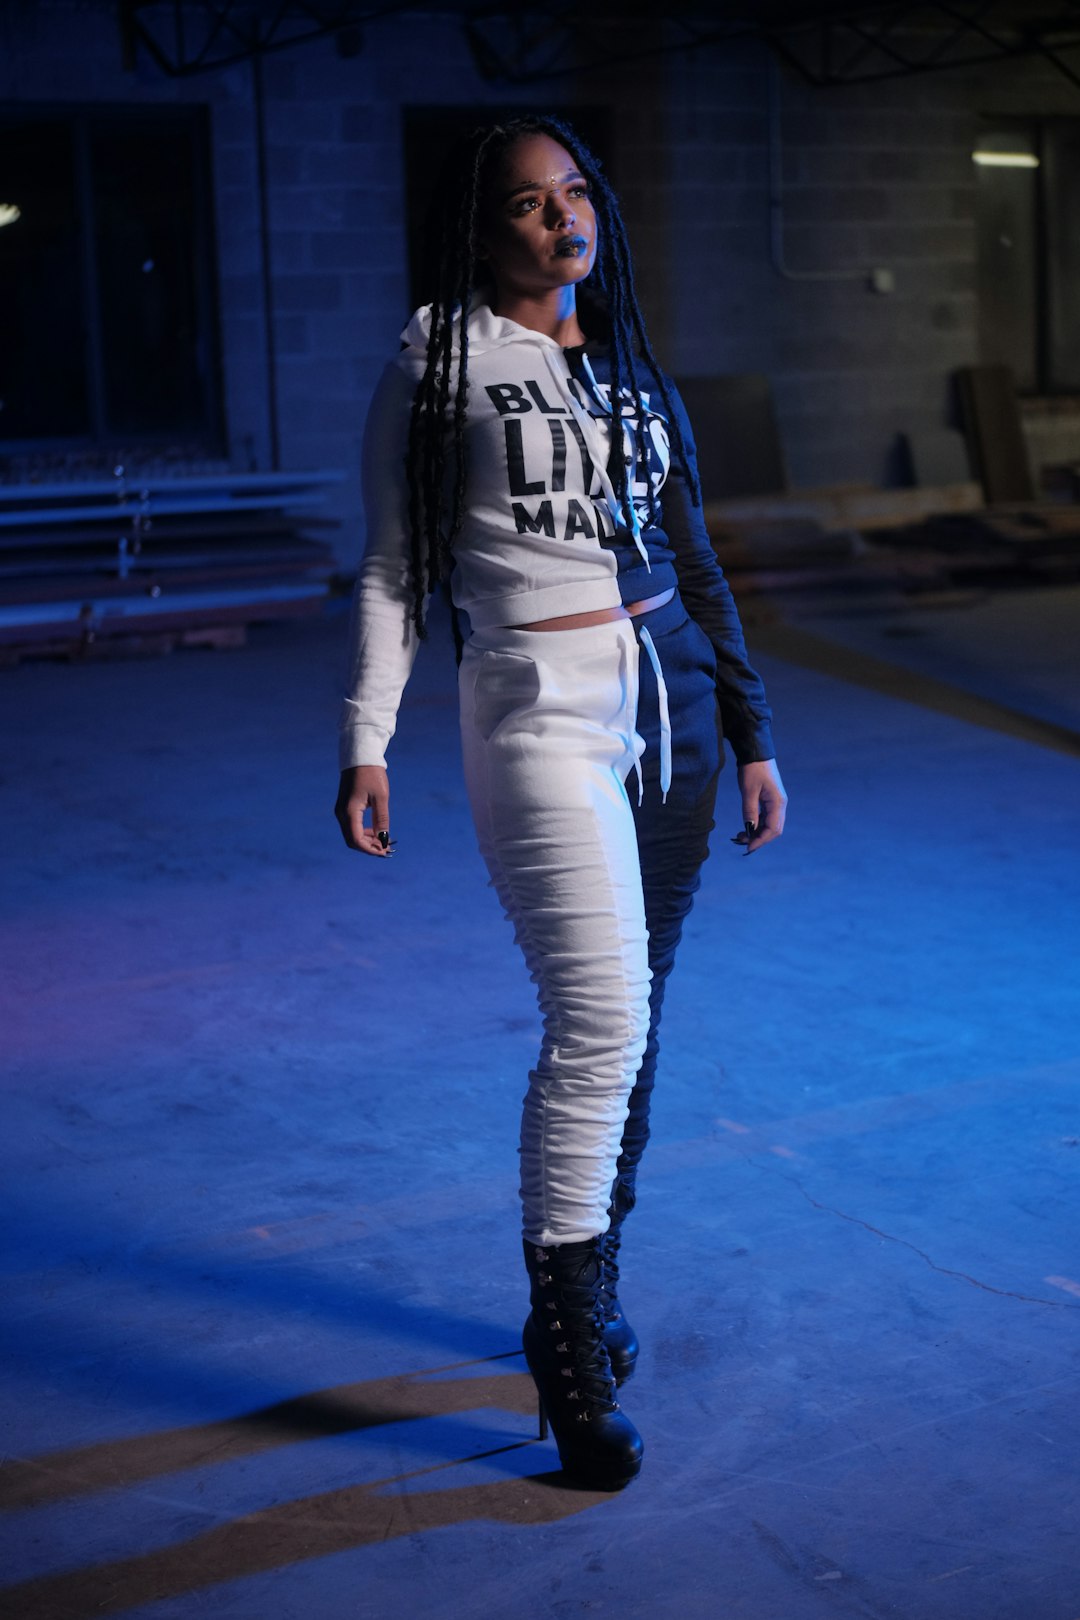 woman in black leather jacket and white pants standing on blue floor